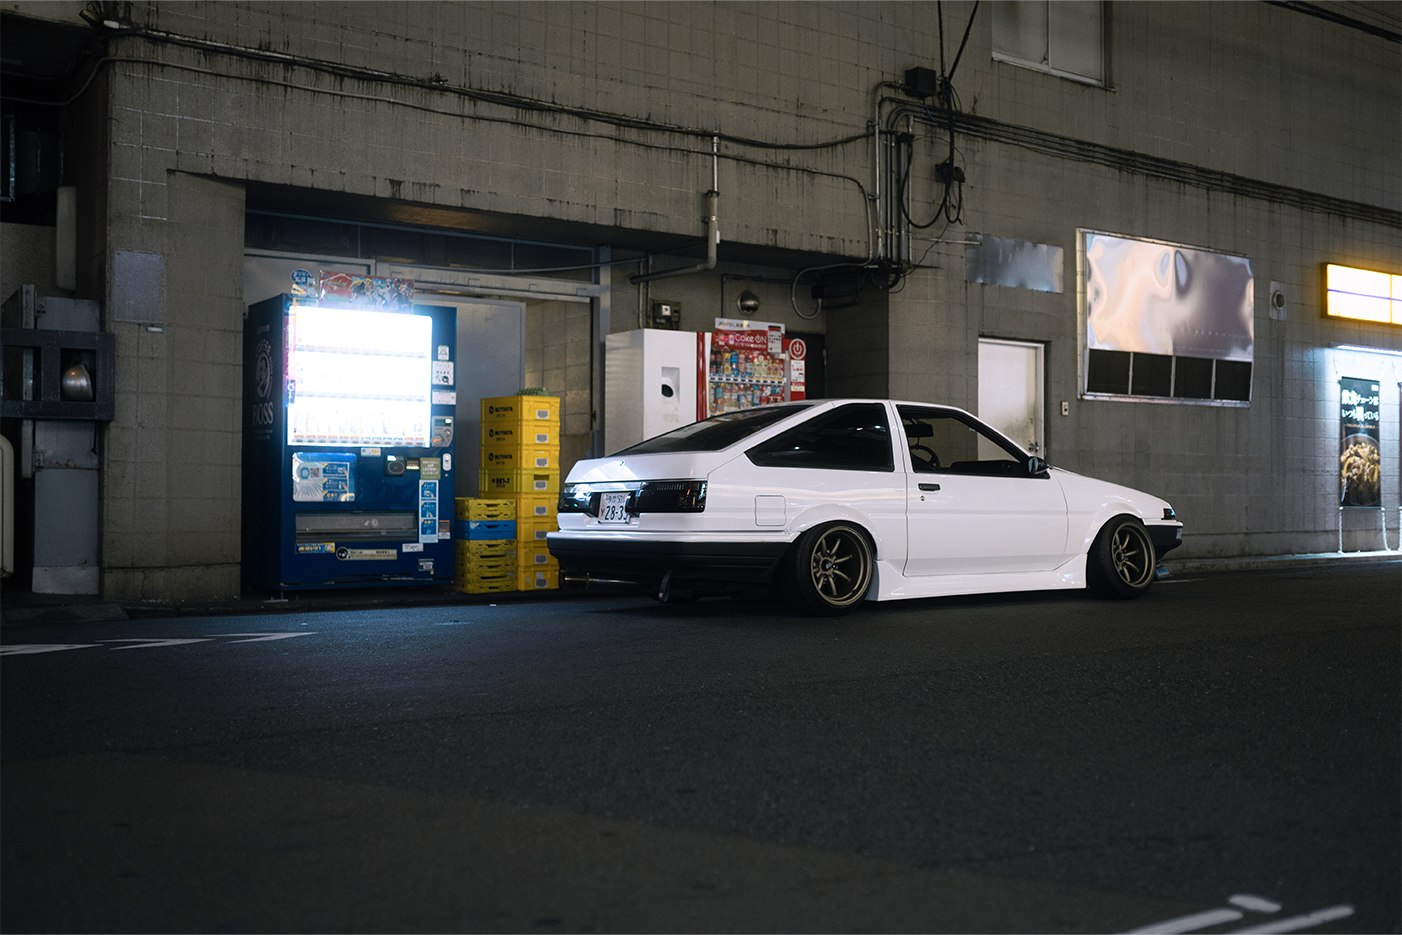 AE86 in Downtown Tokyo